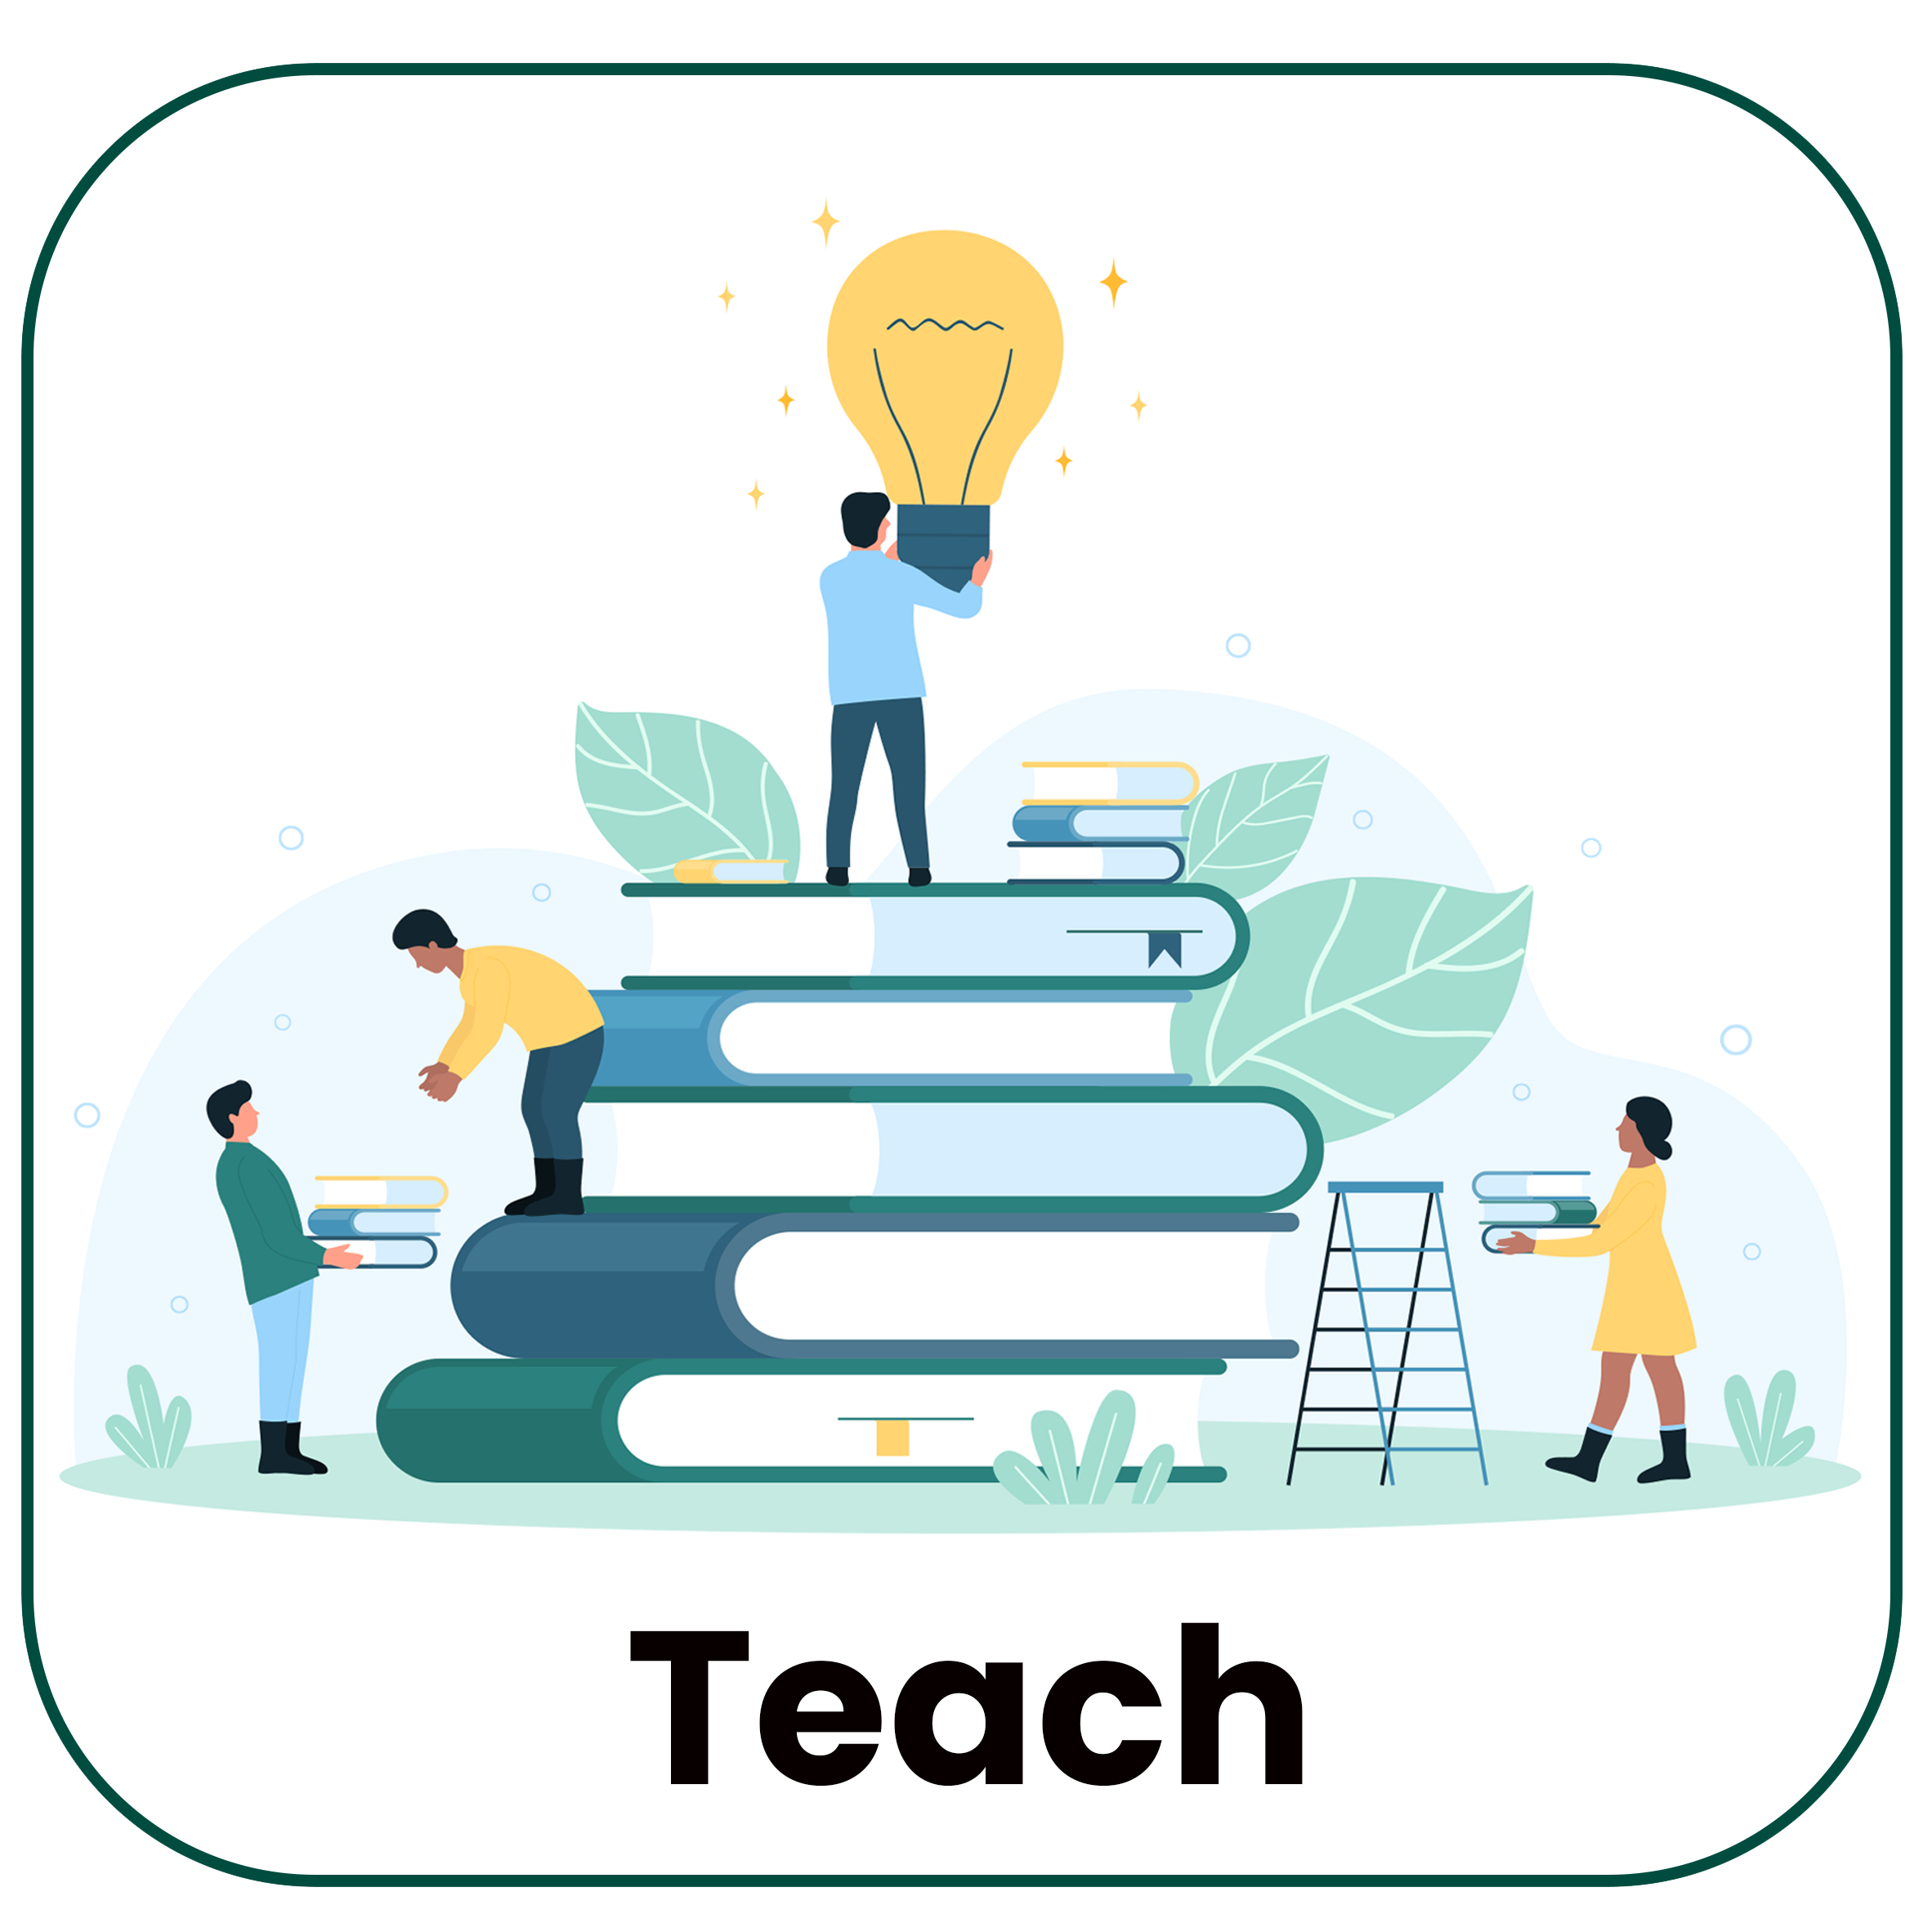 Teach illustration with link to teach page